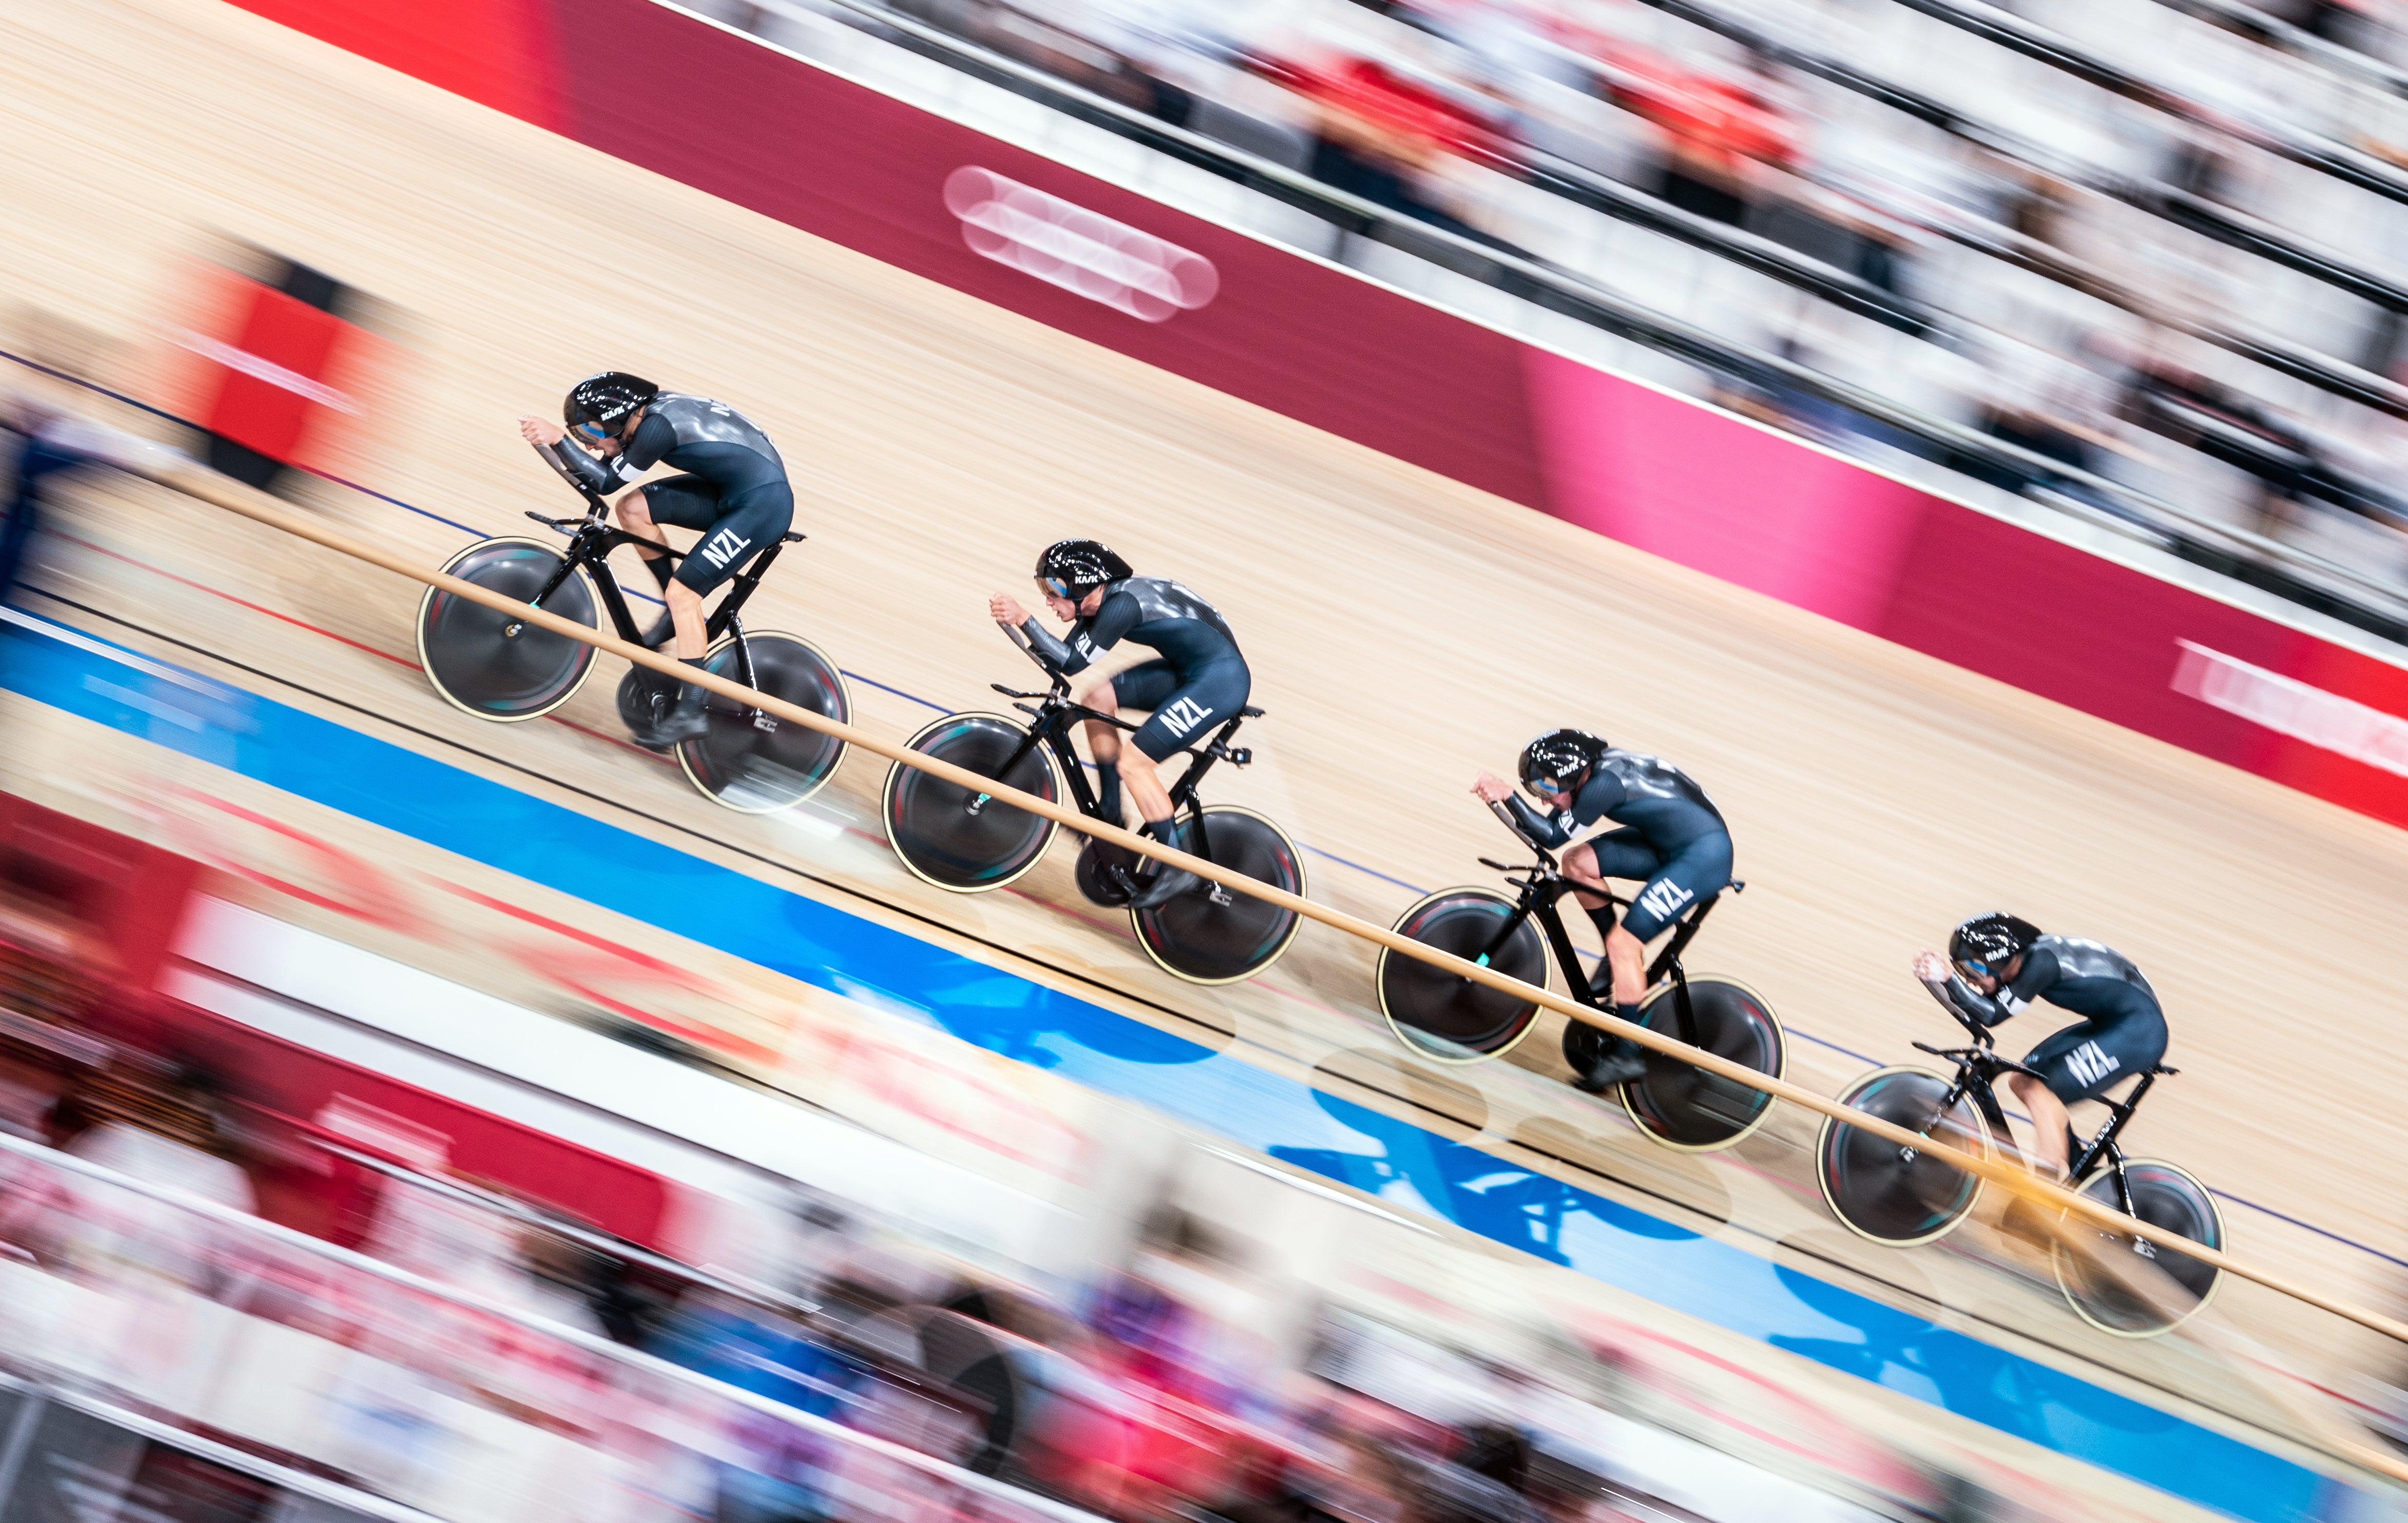 New Zealand in the men’s team pursuit finals during the track cycling at the Izu Velodrome on the 12th day of the Tokyo Games (Danny Lawson/PA)